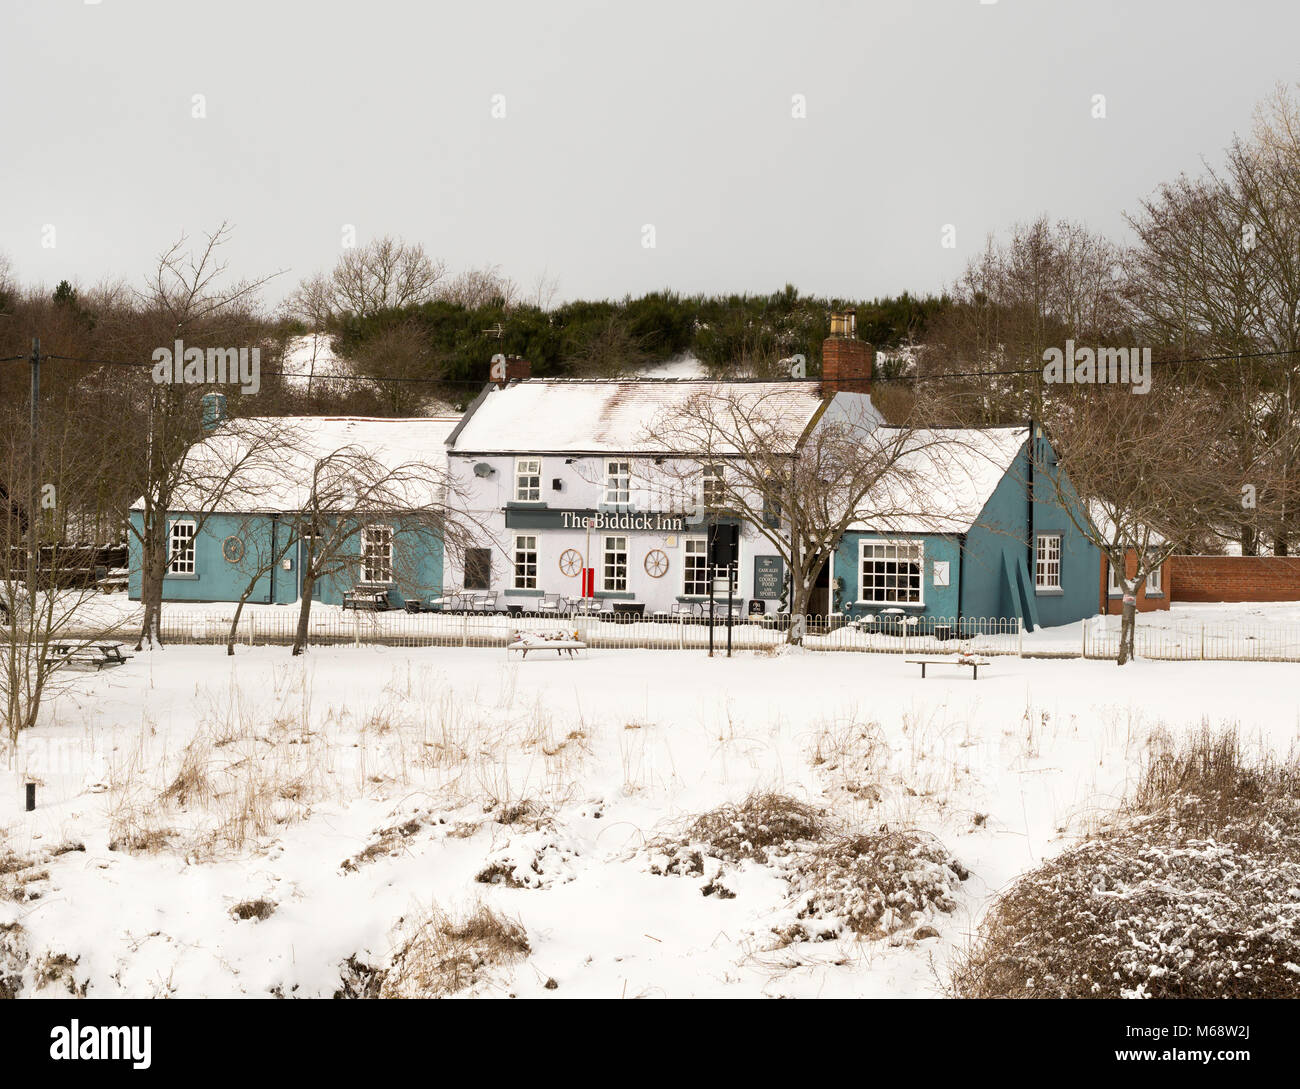 The Biddick Inn, a country pub, Washington, Tyne and Wear, England, seen in wintry conditions Stock Photo